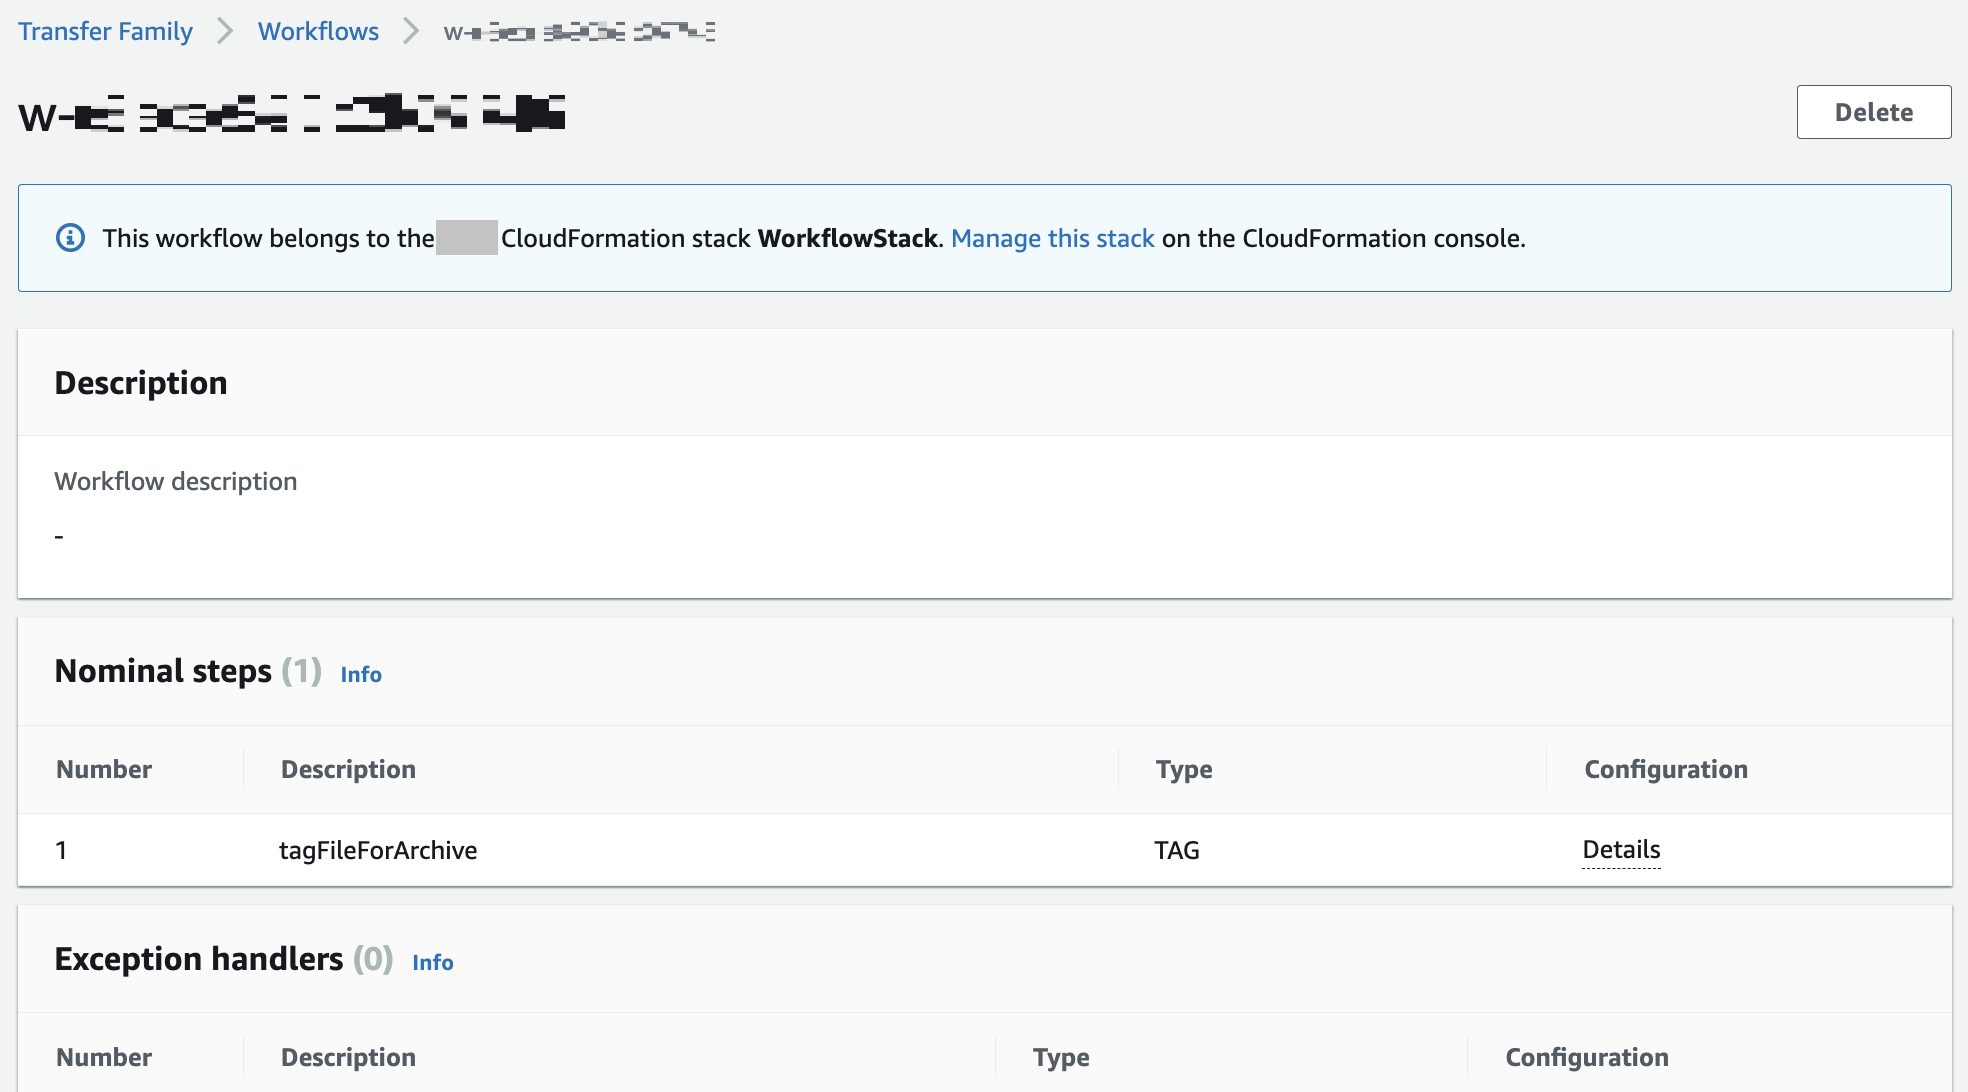 The Workflows details screen for a workflow that is part of an Amazon CloudFormation stack, showing the message that you manage this workflow in CloudFormation.